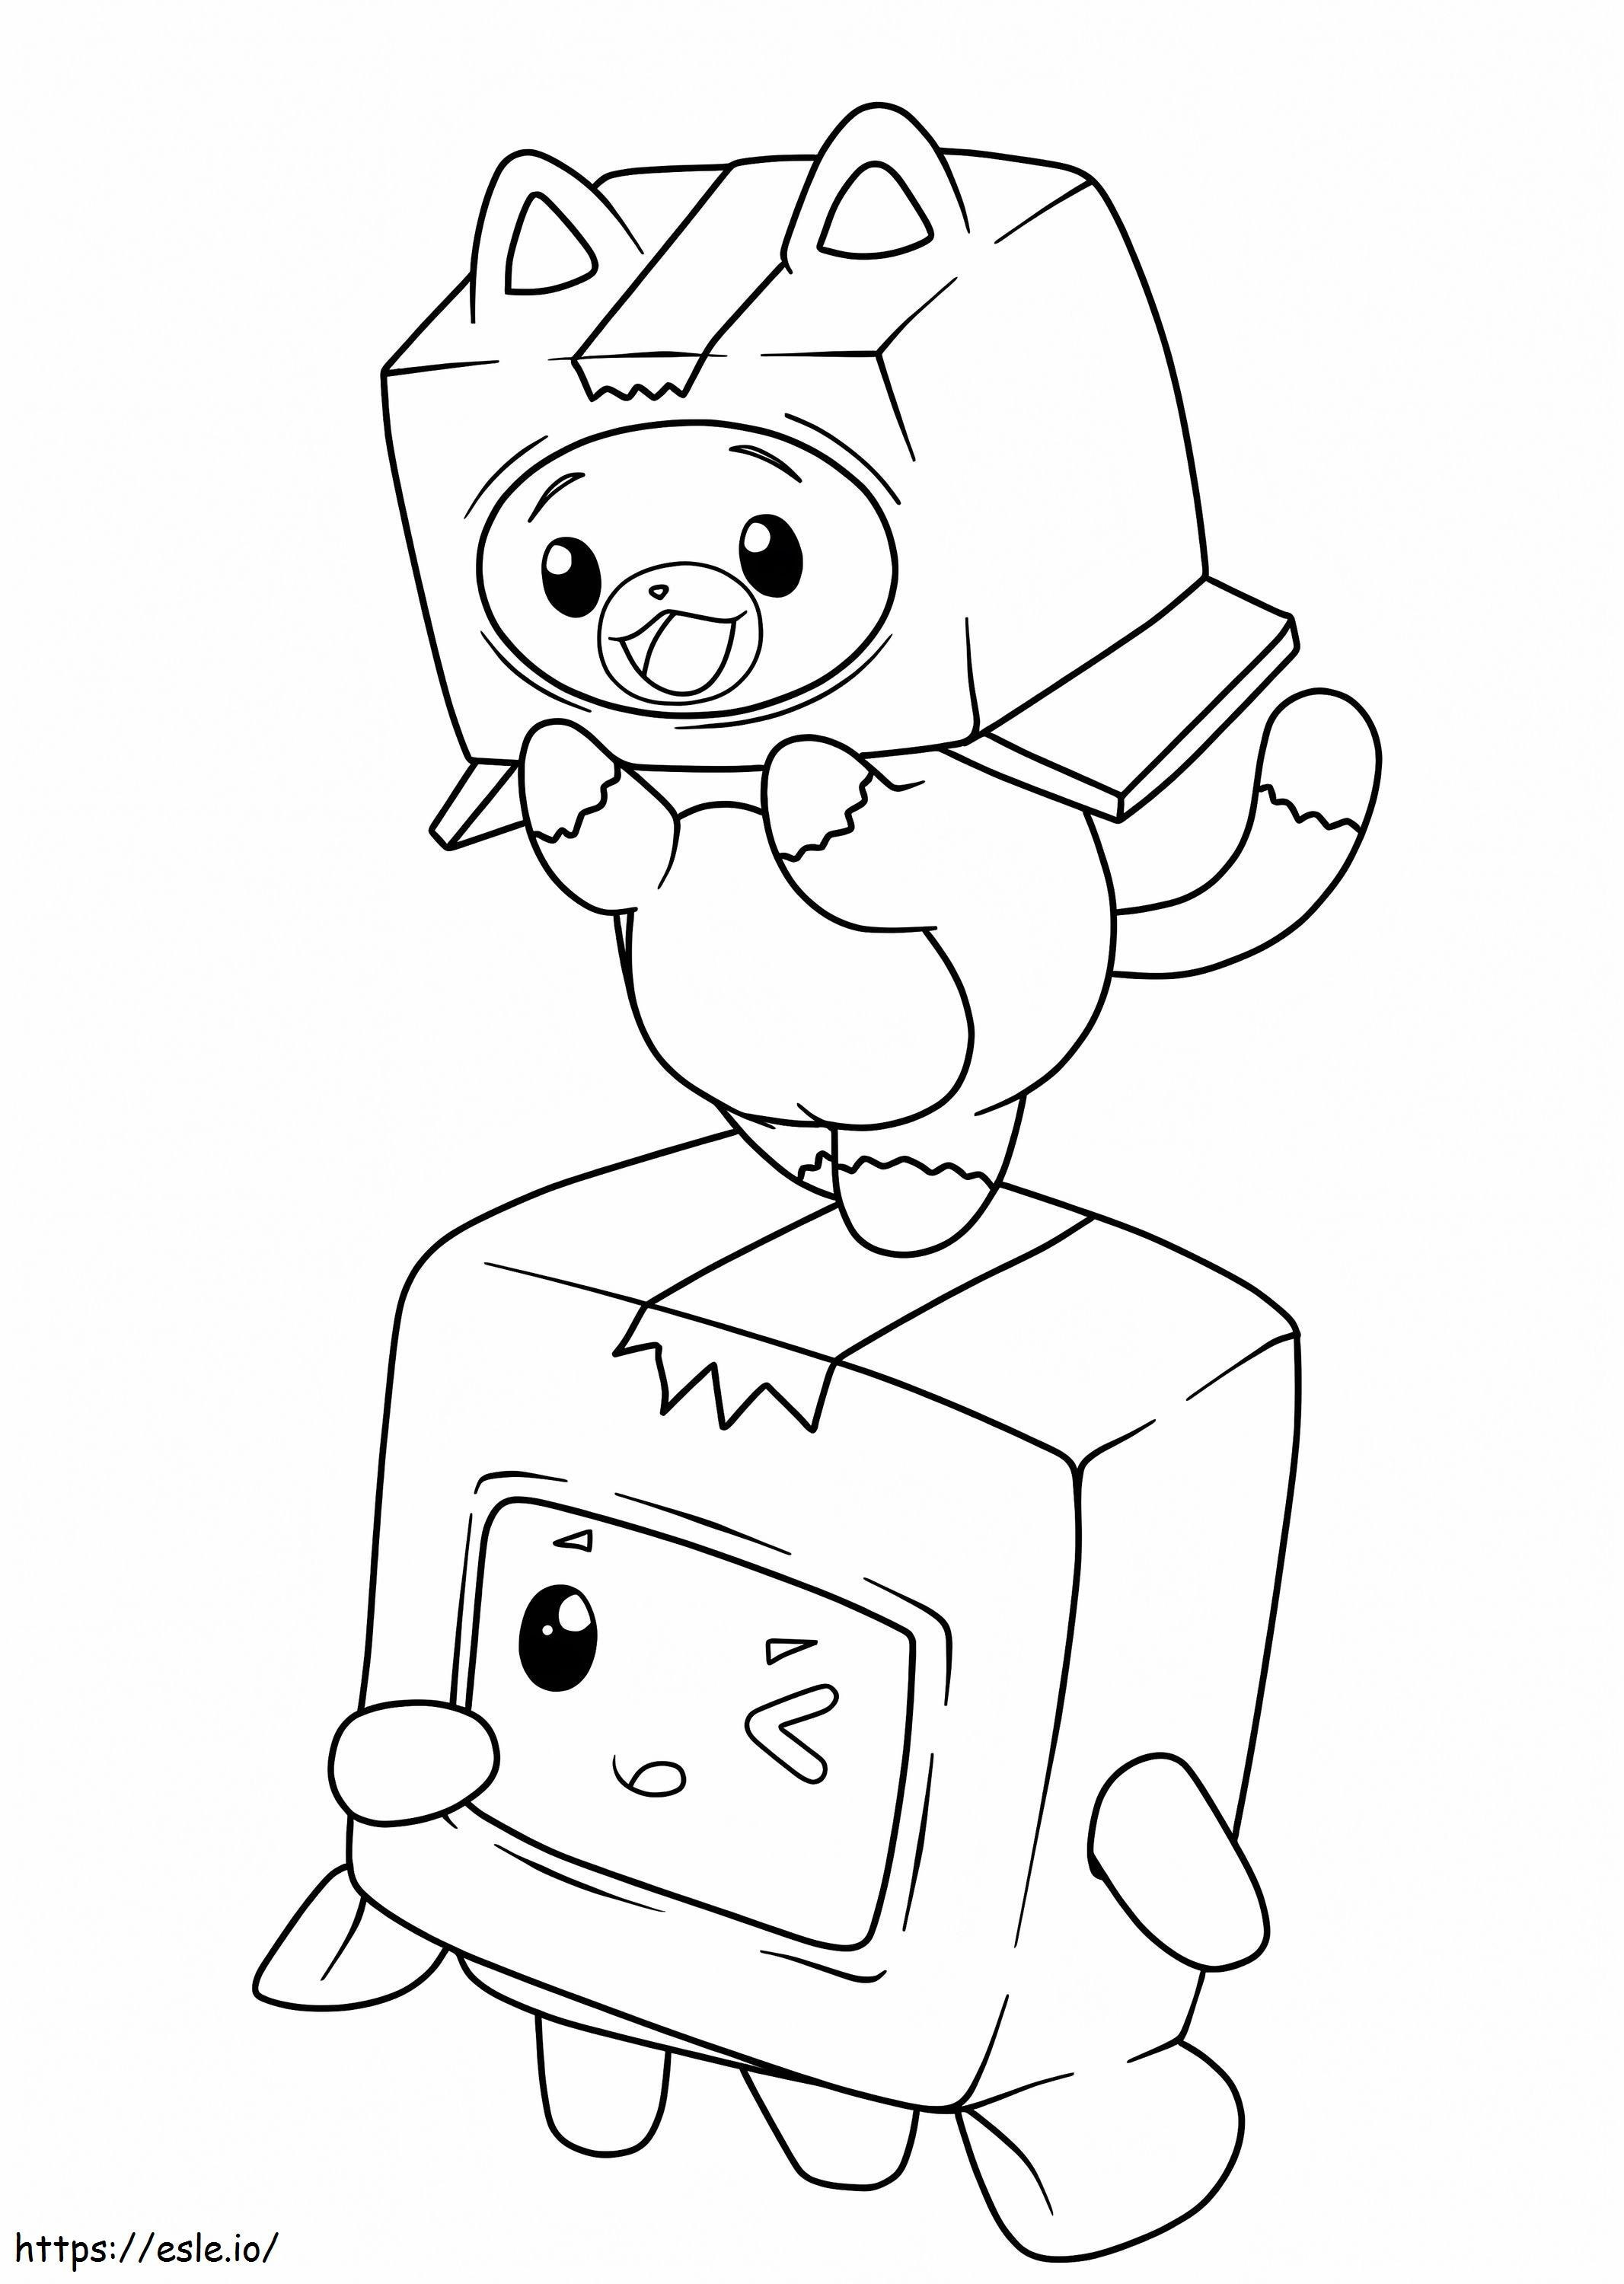 Happy Lankybox coloring page